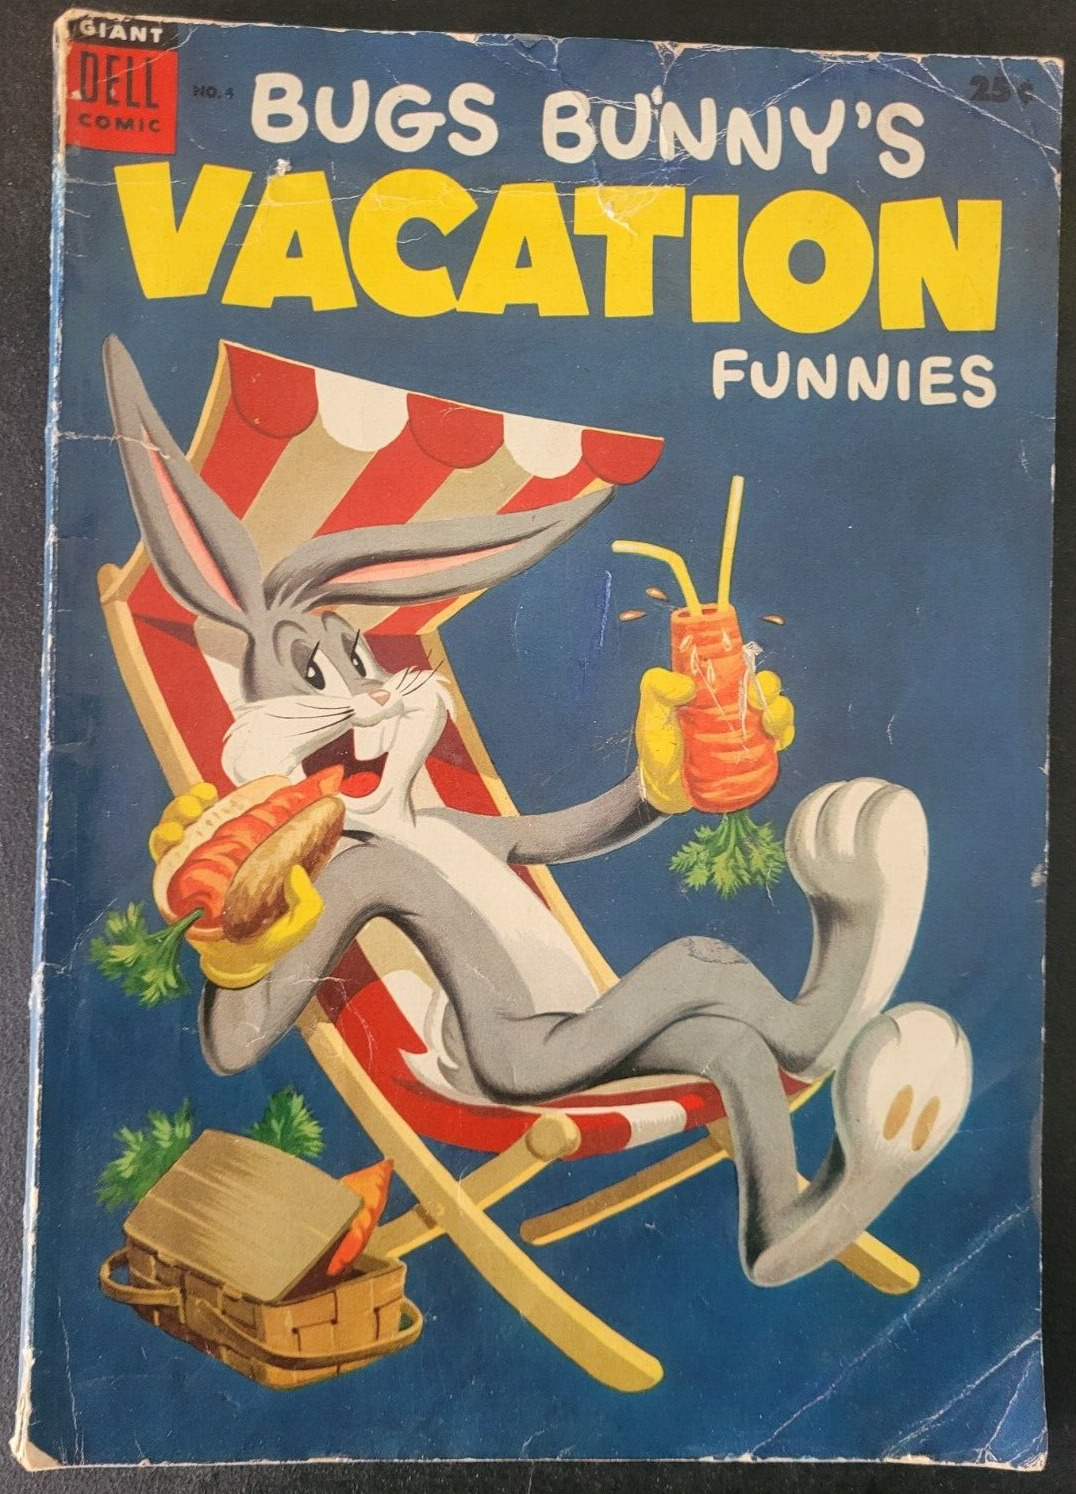 BUGS BUNNY'S VACATION FUNNIES #4 (1954) SILVER AGE GIANT DELL COMICS LOONEY TUNE